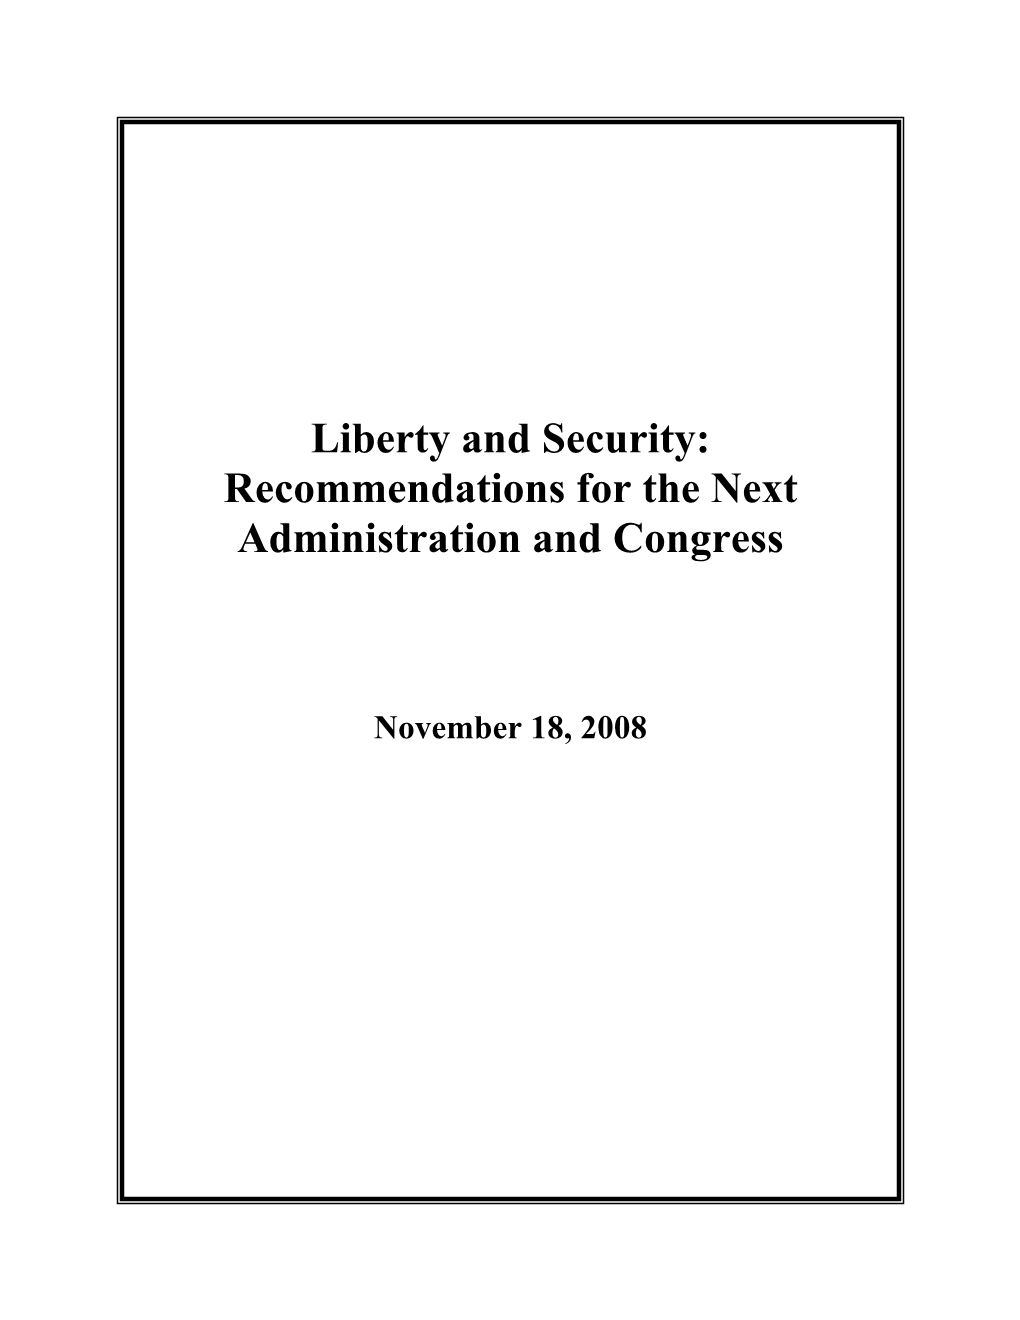 Liberty and Security: Recommendations for the Next Administration and Congress